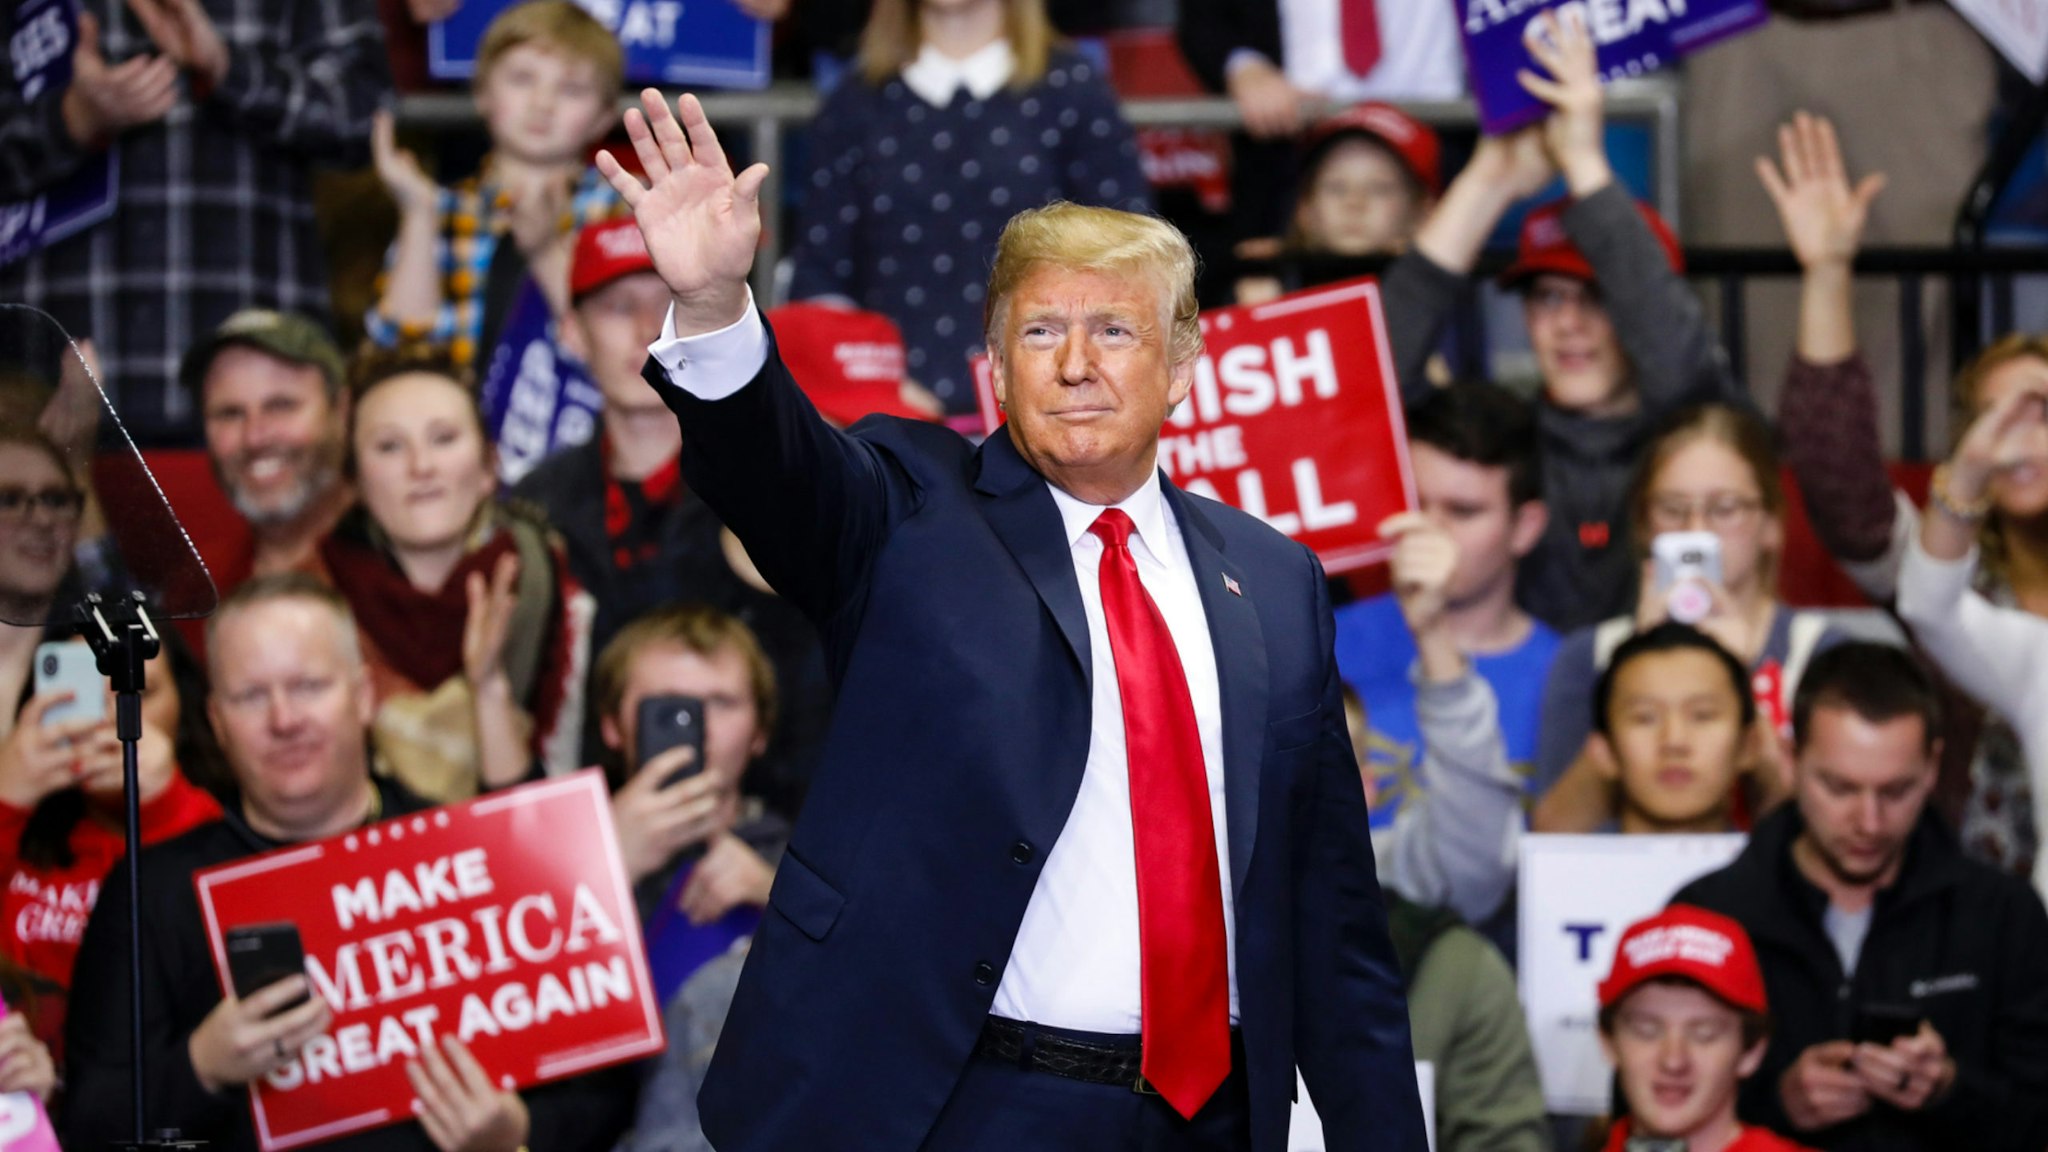 President Donald Trump arrives at a campaign rally for Republican Senate candidate Mike Braun at the County War Memorial Coliseum November 5, 2018 in Fort Wayne, Indiana.